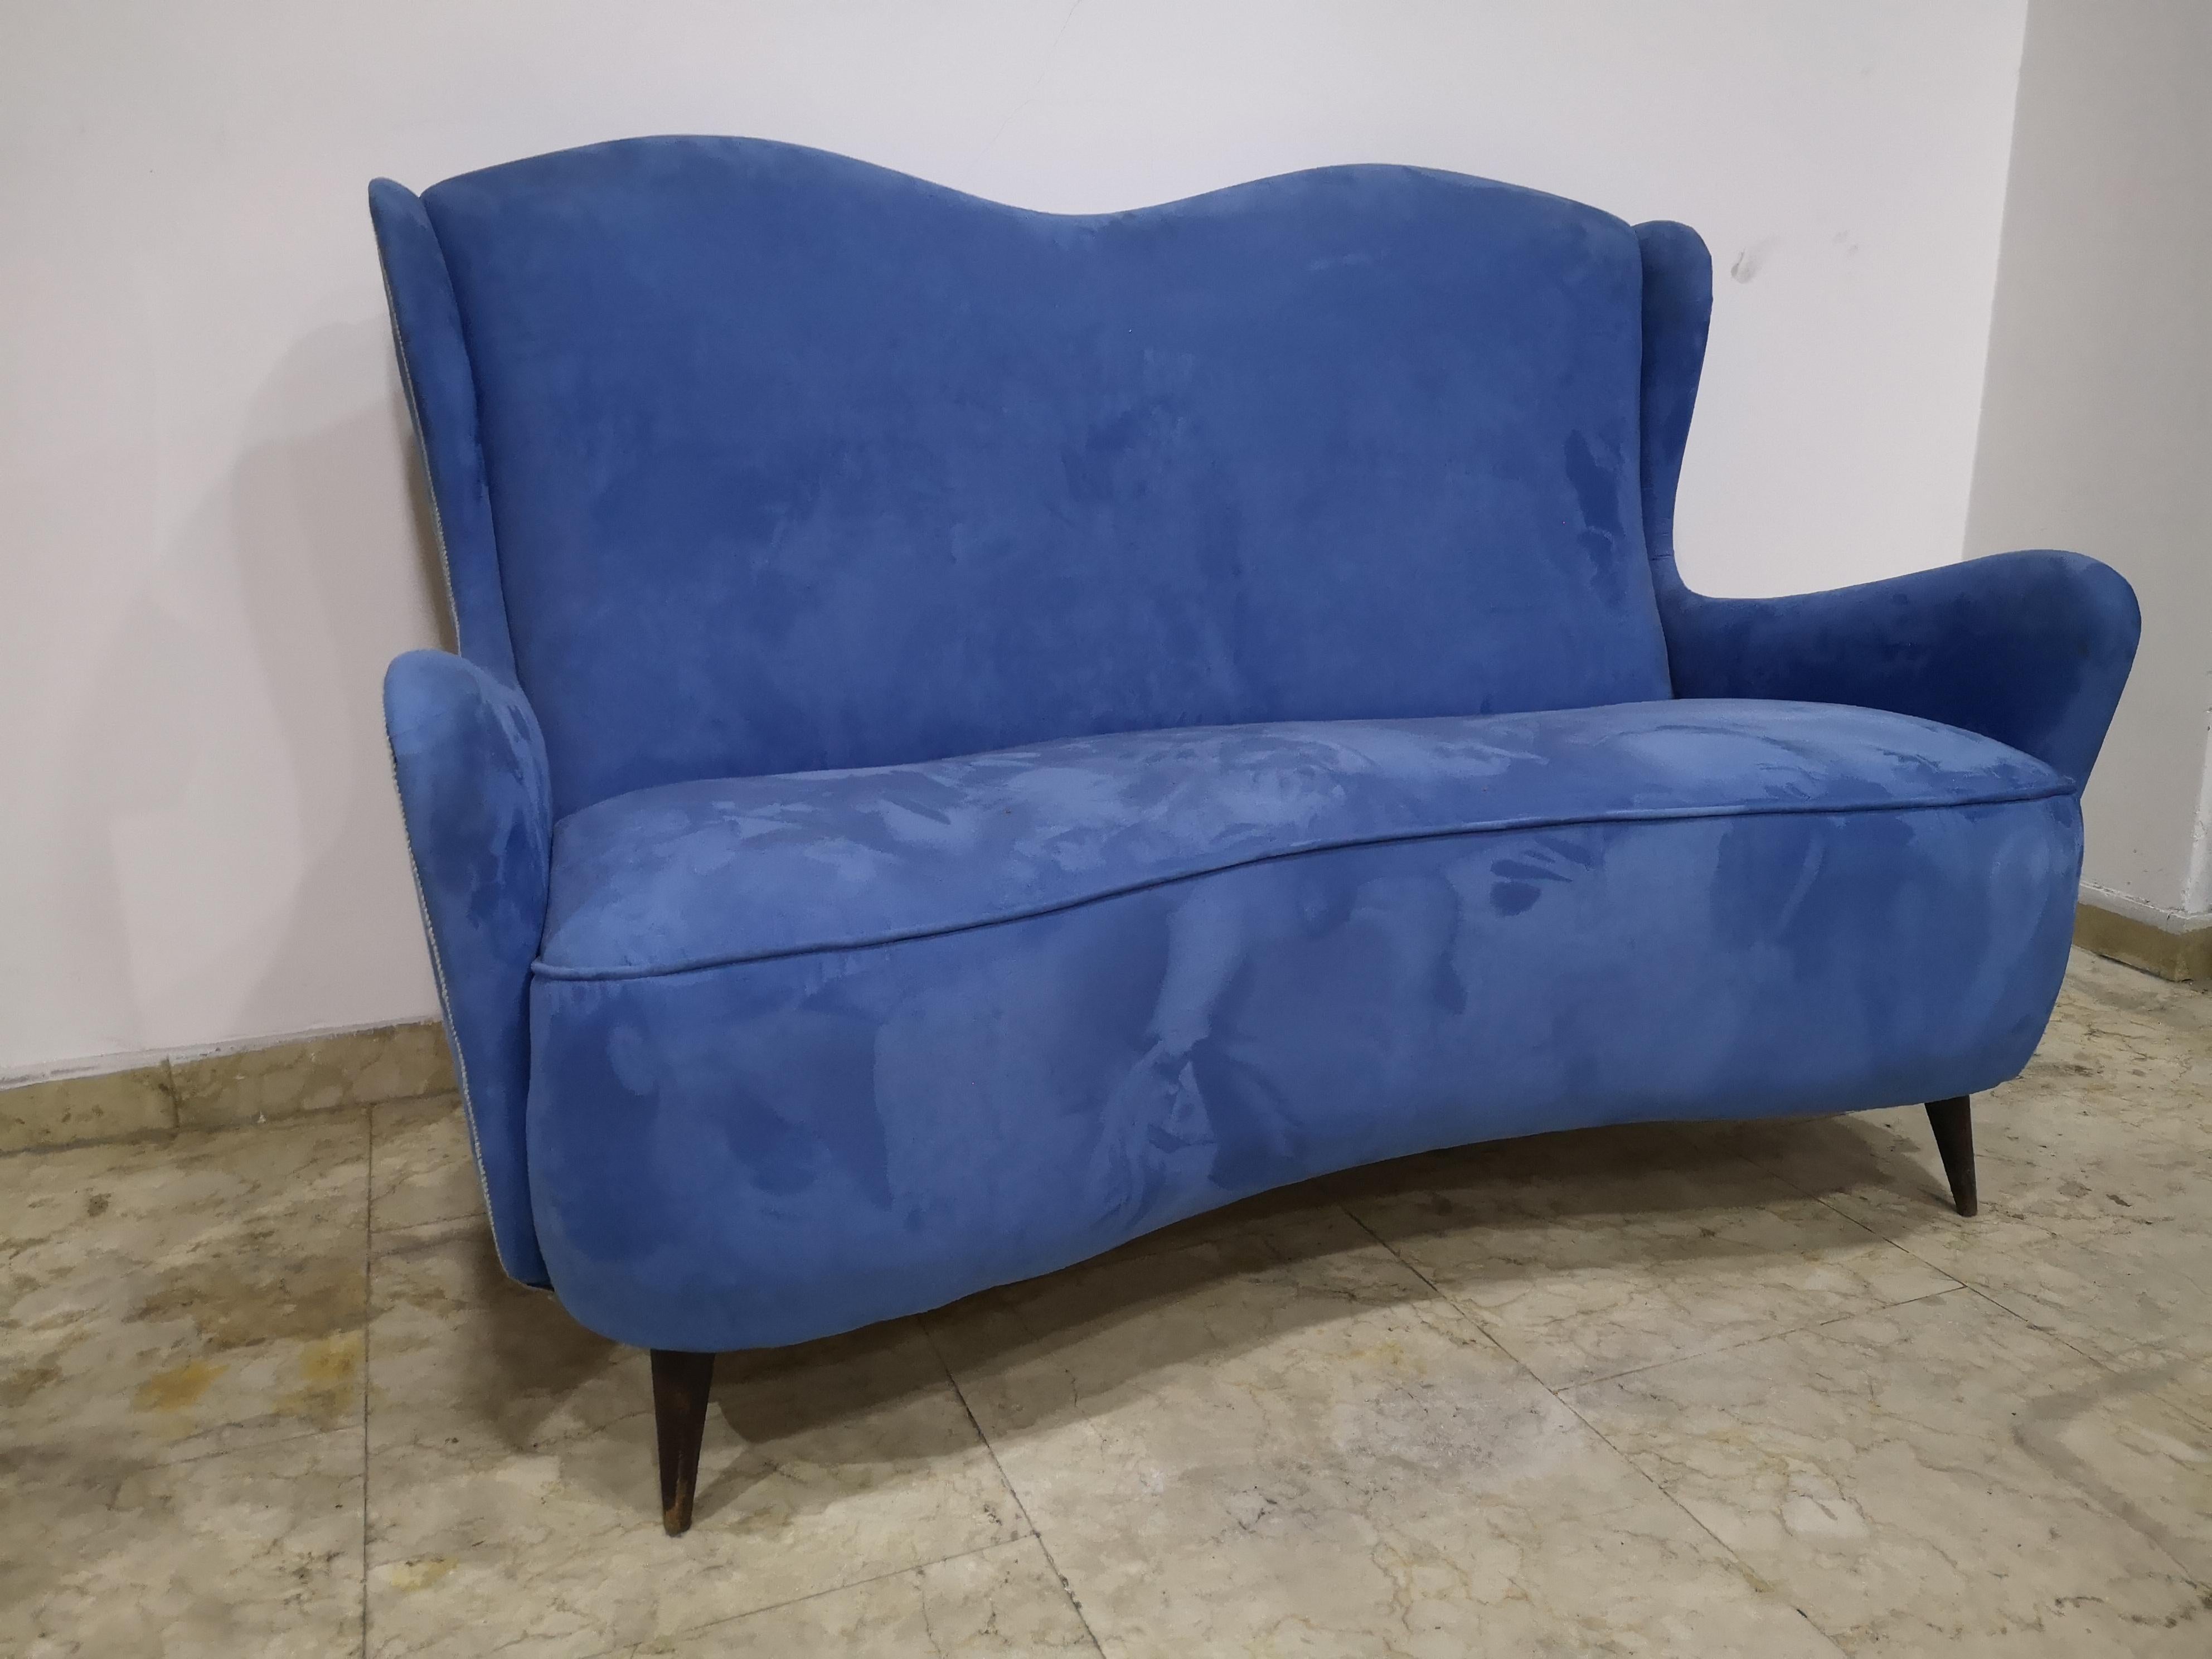 Two-seater sofa of 1950s Italian design. Completion restored with alcantara fabric upholstery.